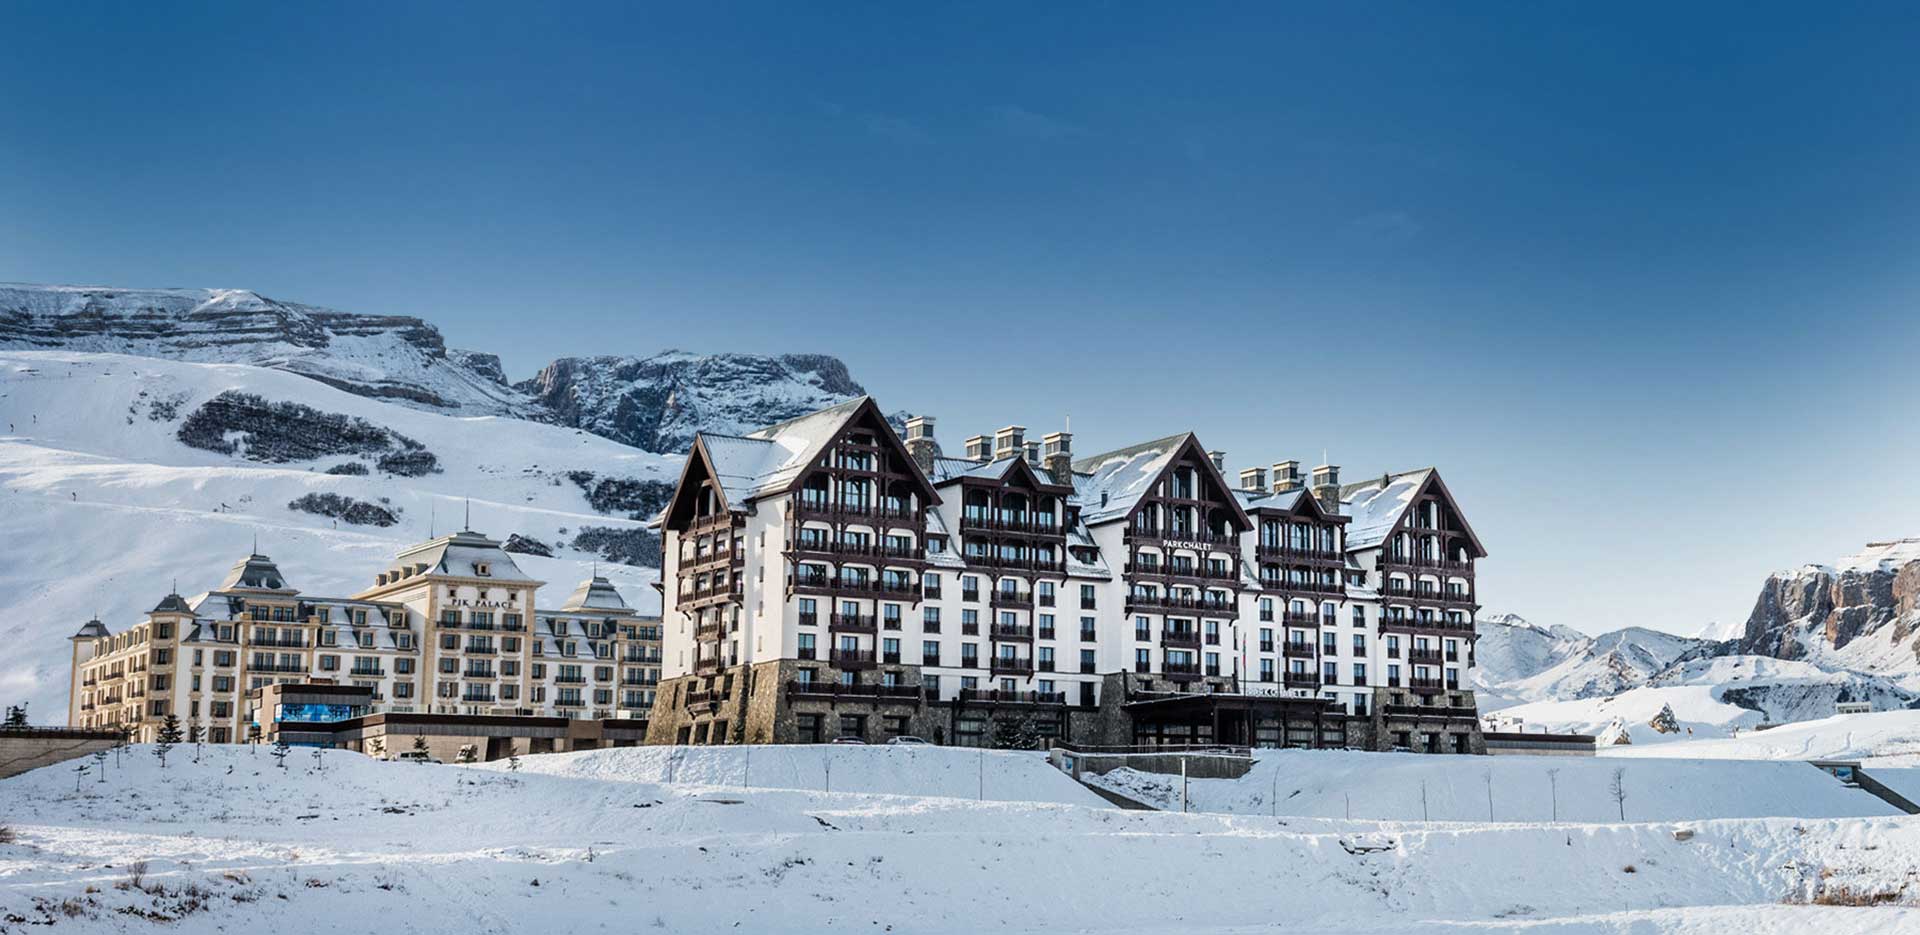 A large hotel in the snow